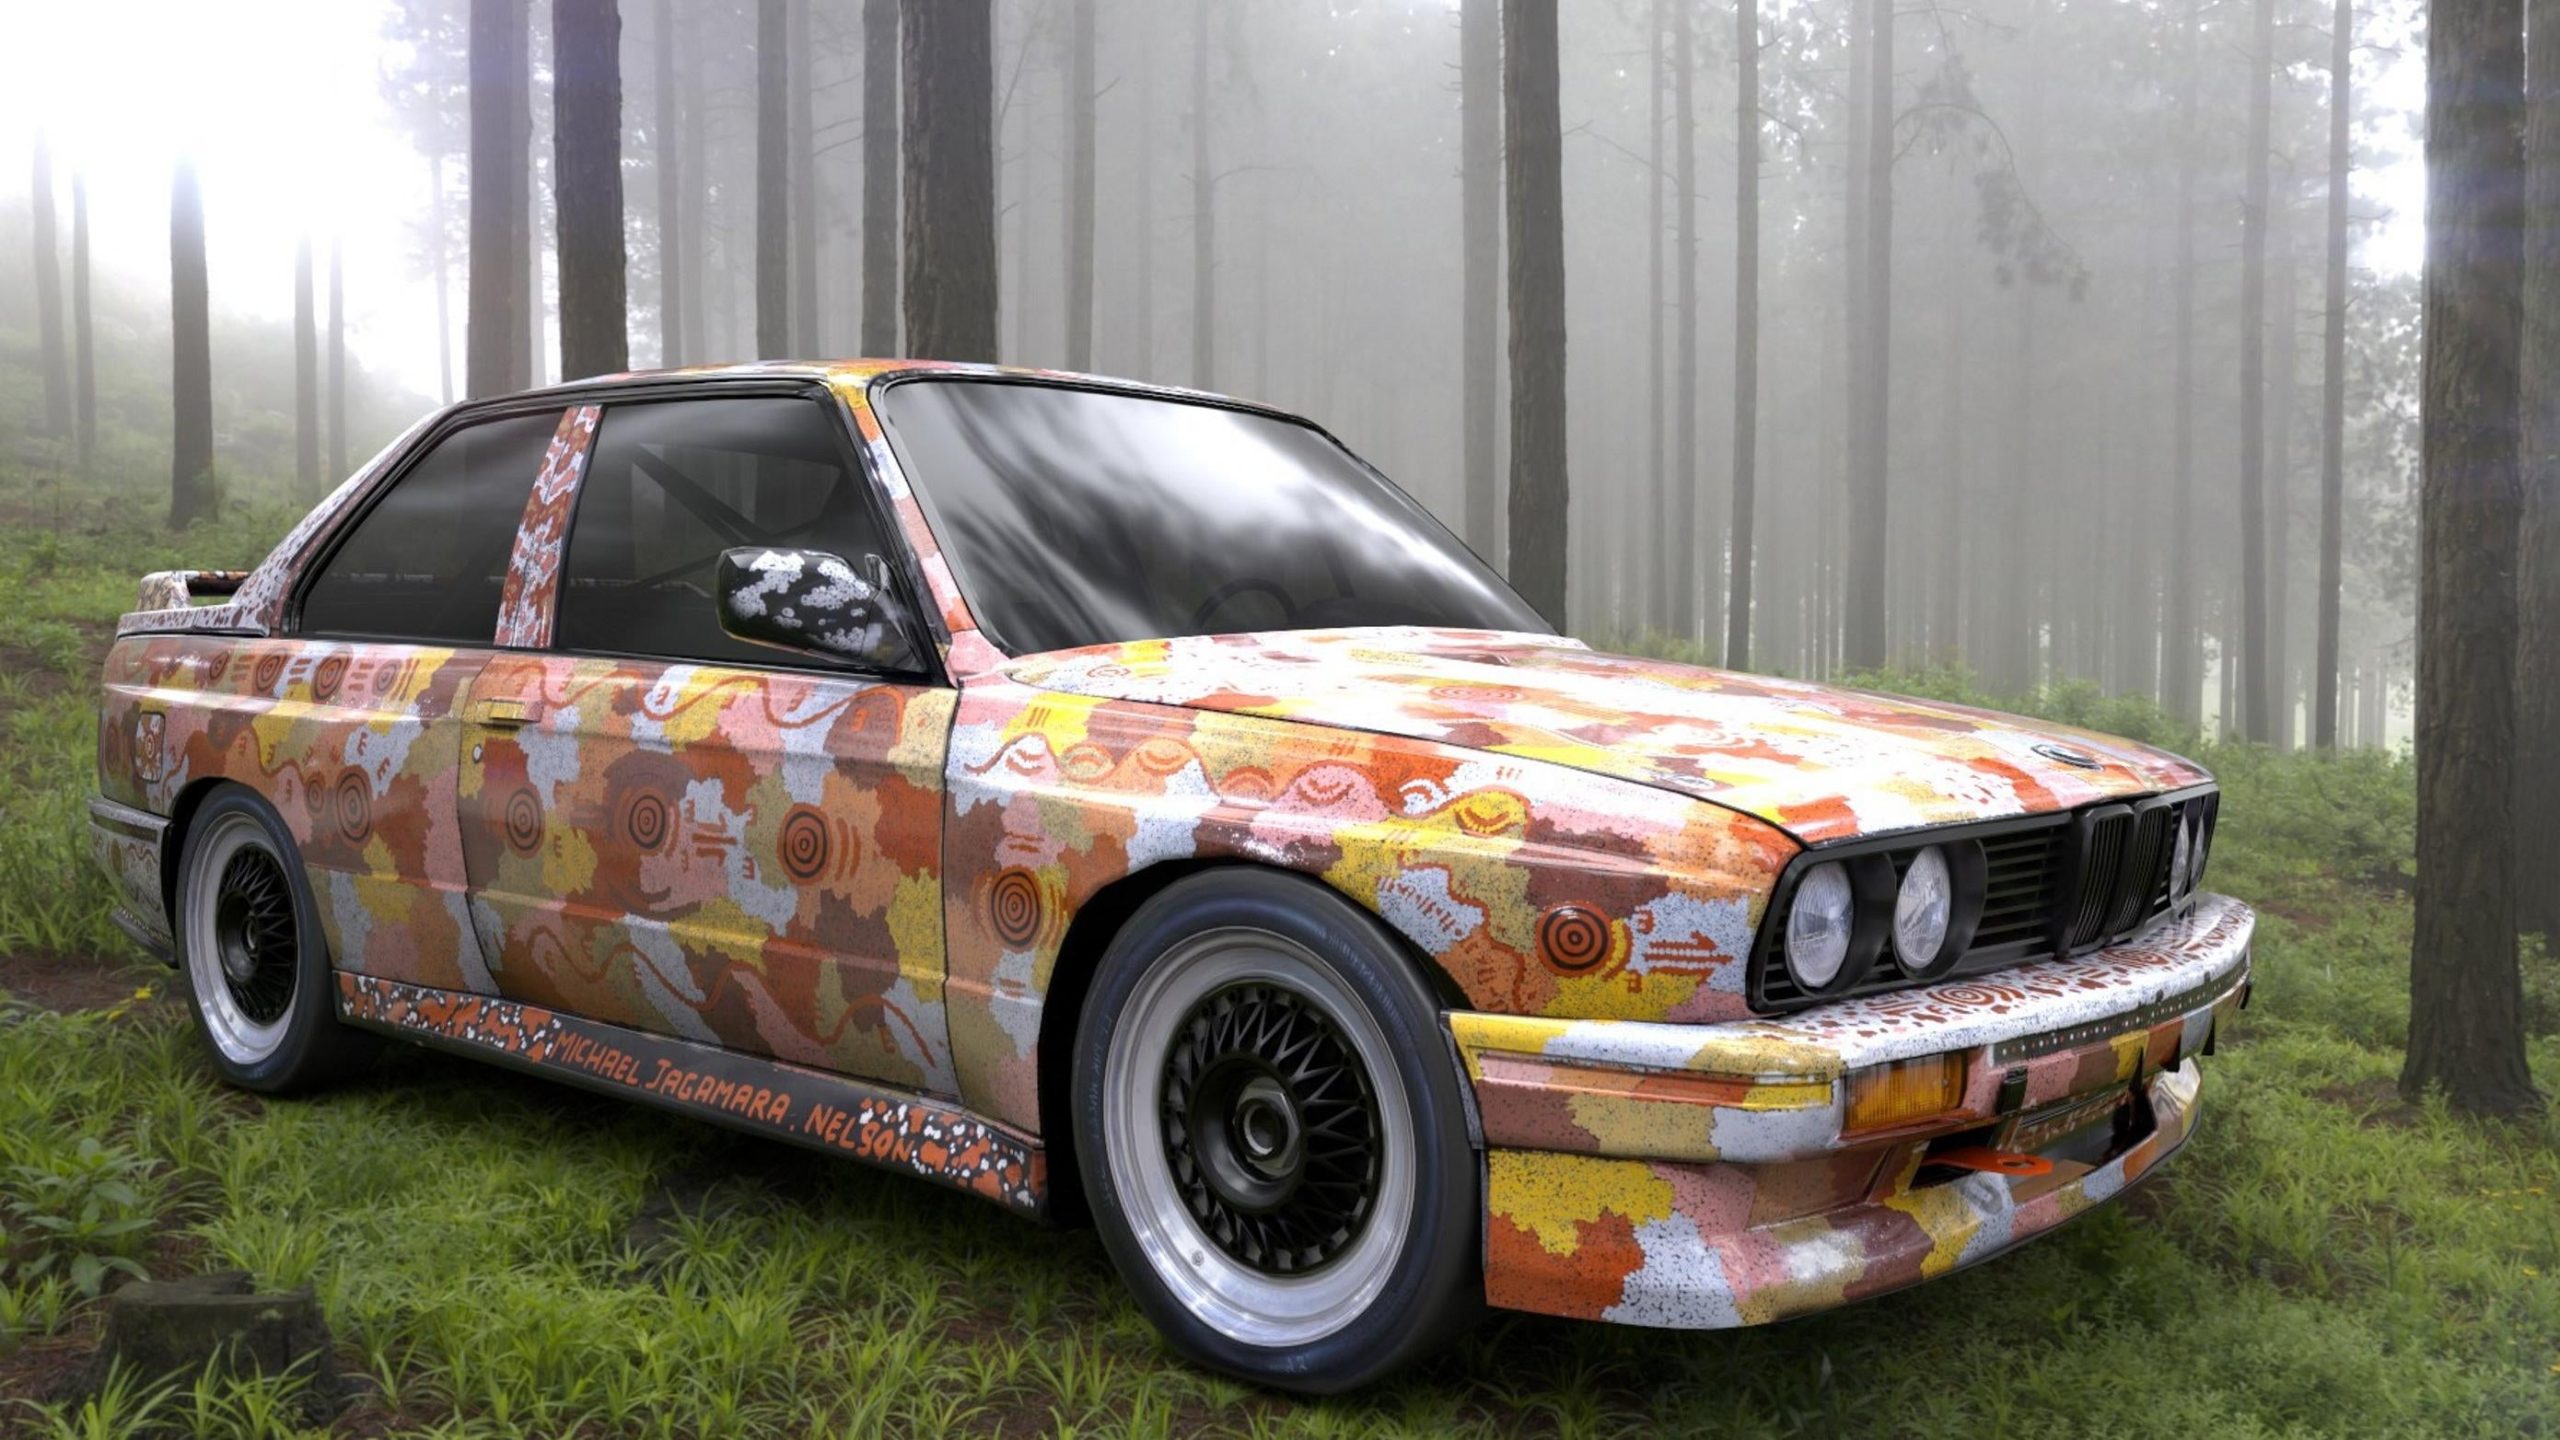 You Can Use Your Phone To Pretend You Own A BMW Art Car